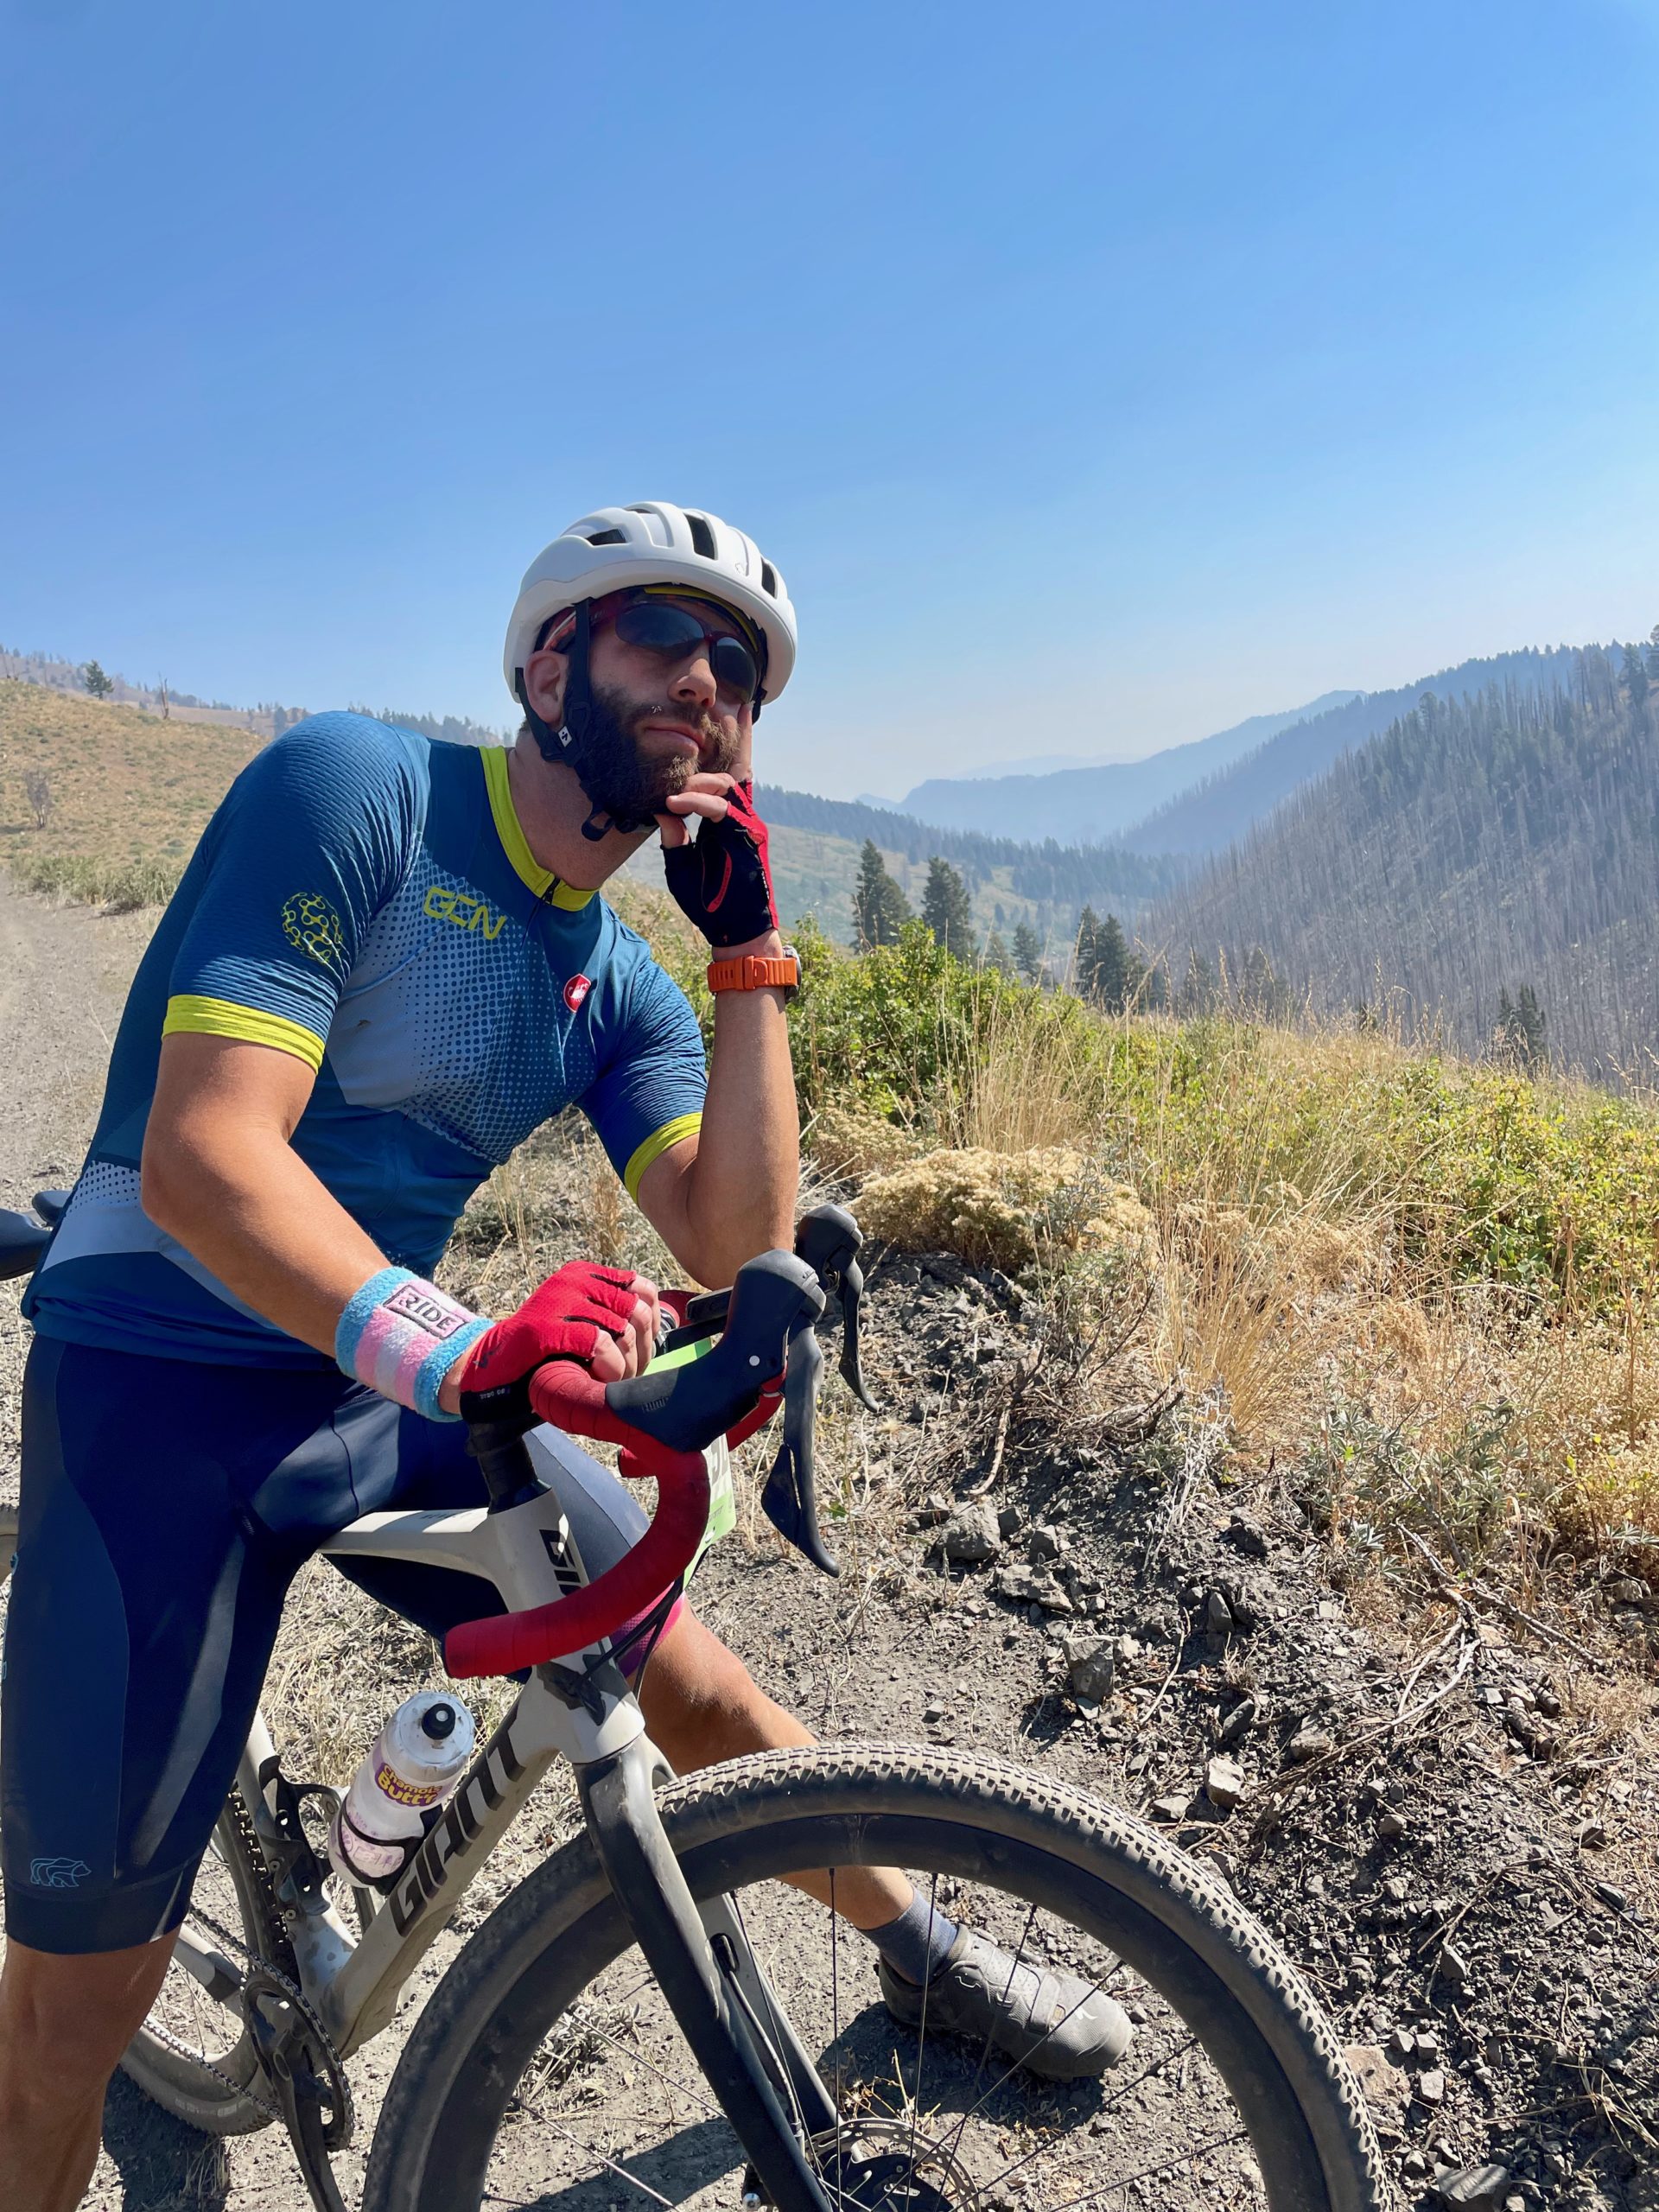 Man in a relaxed position poses on bike with mountains in the background